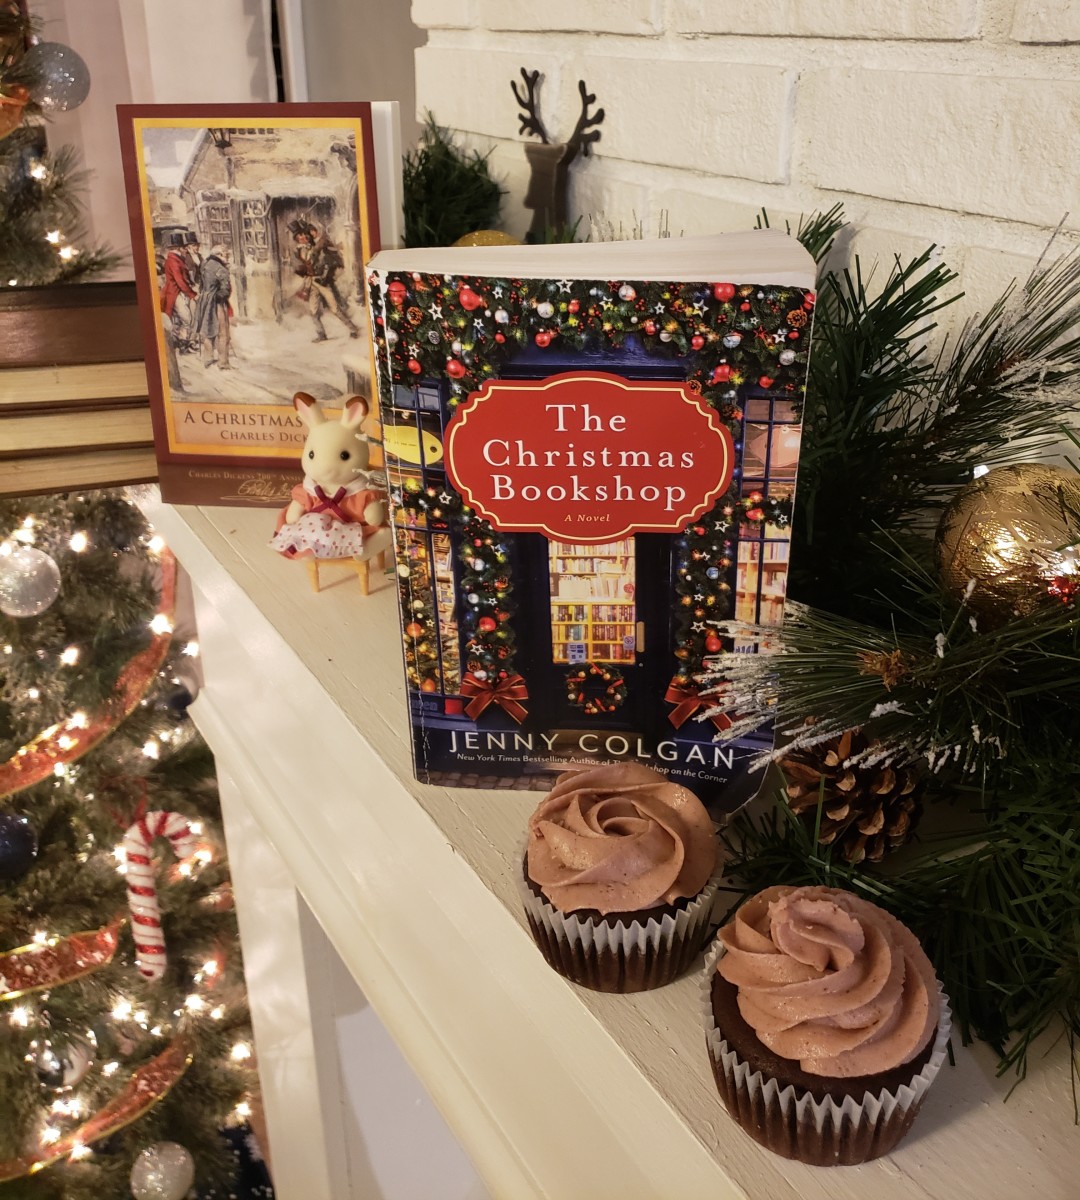 Pair "The Christmas Bookshop" with mulled wine cupcakes